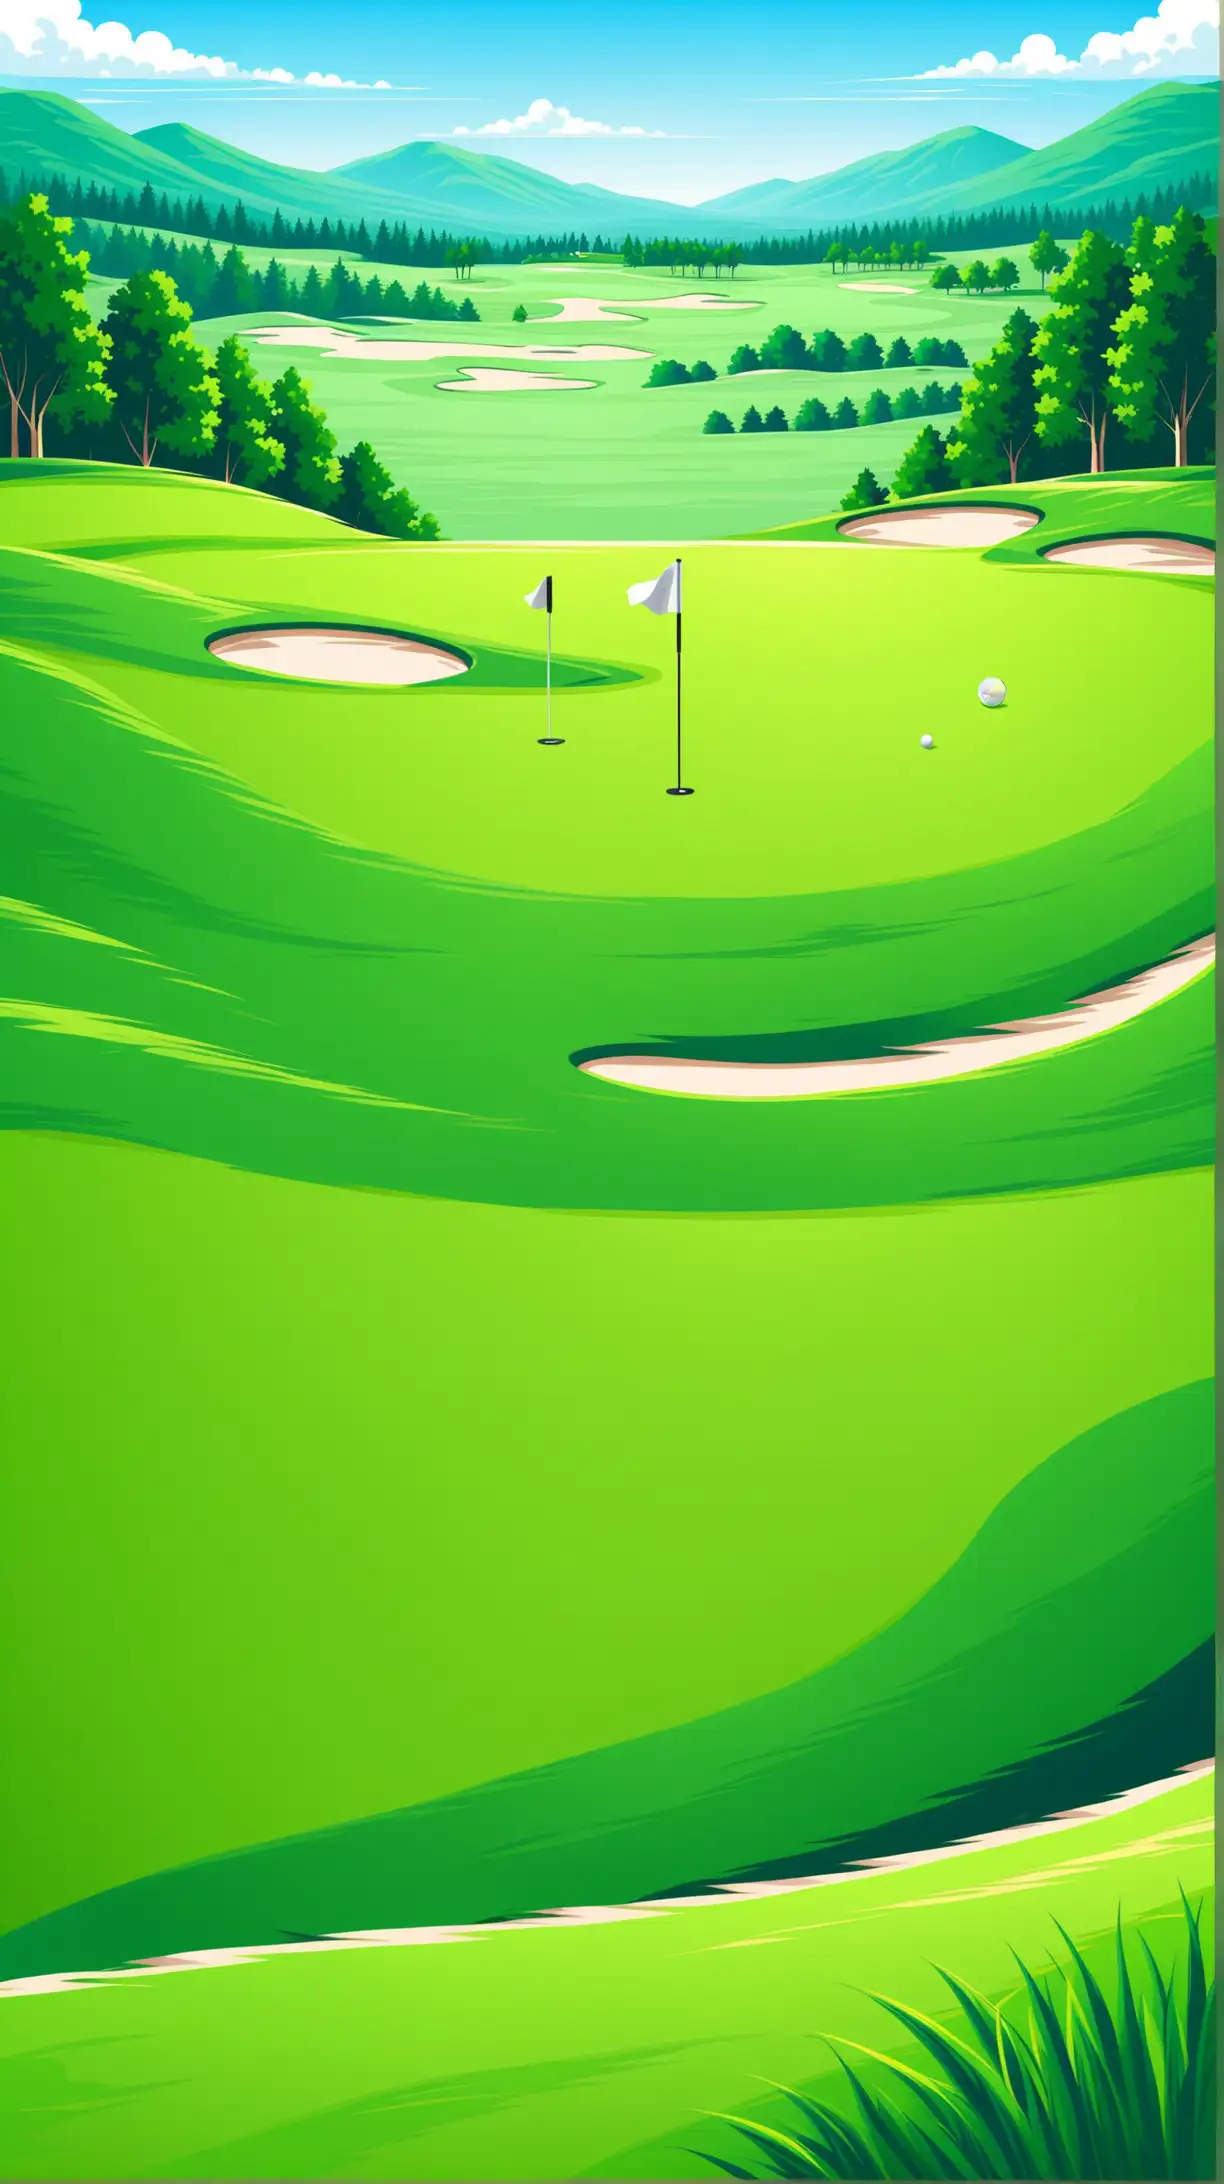 Scenic Golf Course with Rolling Hills Vector Background